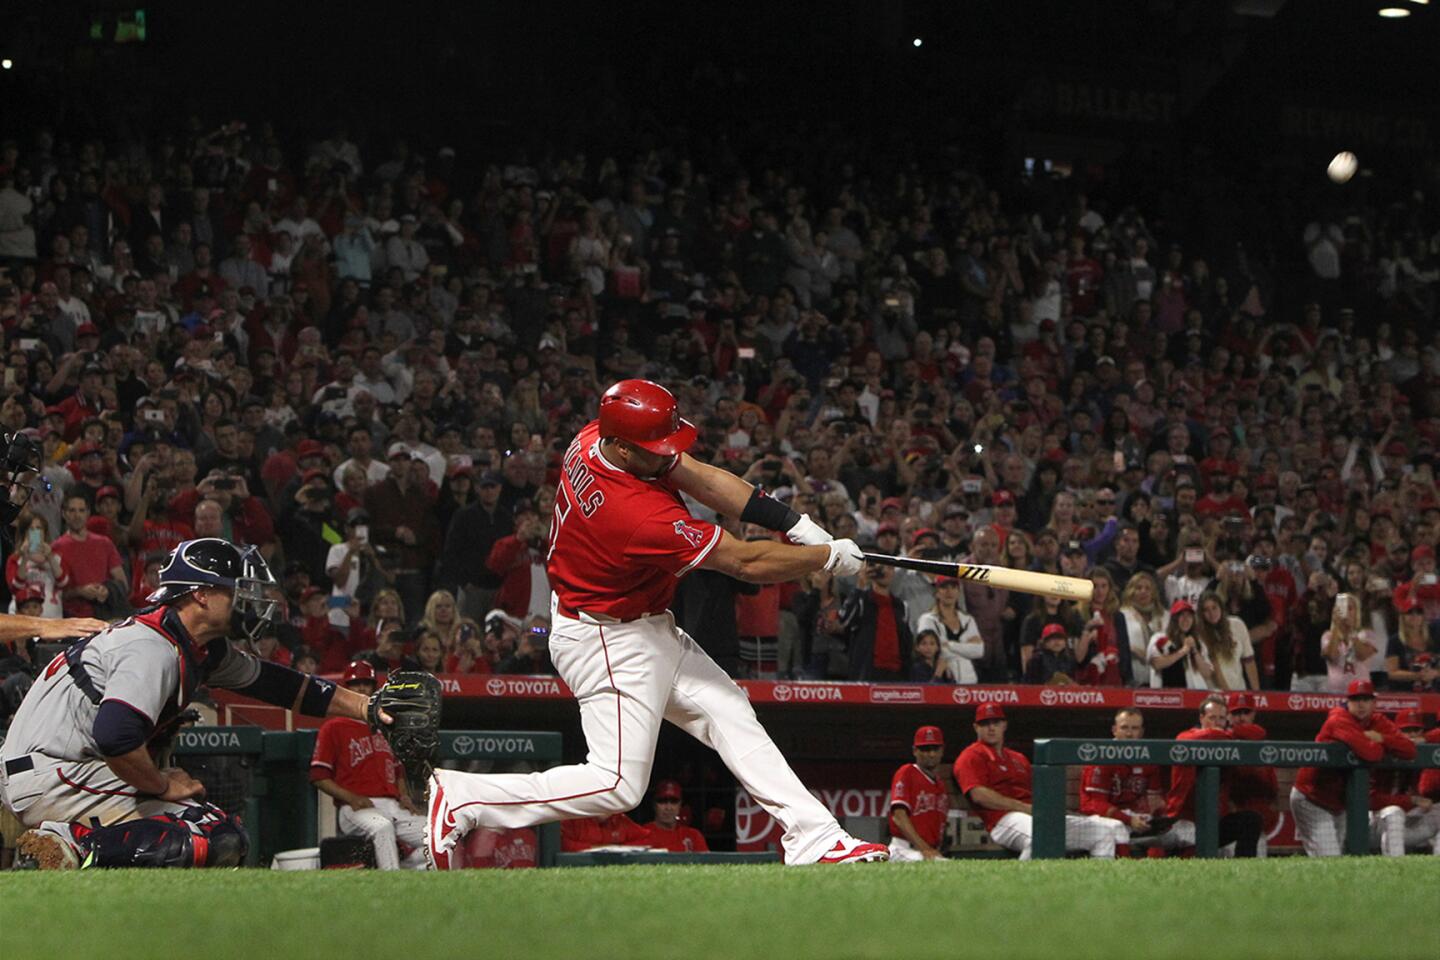 Albert Pujols' chase for 700 homers gets grand boost with recent